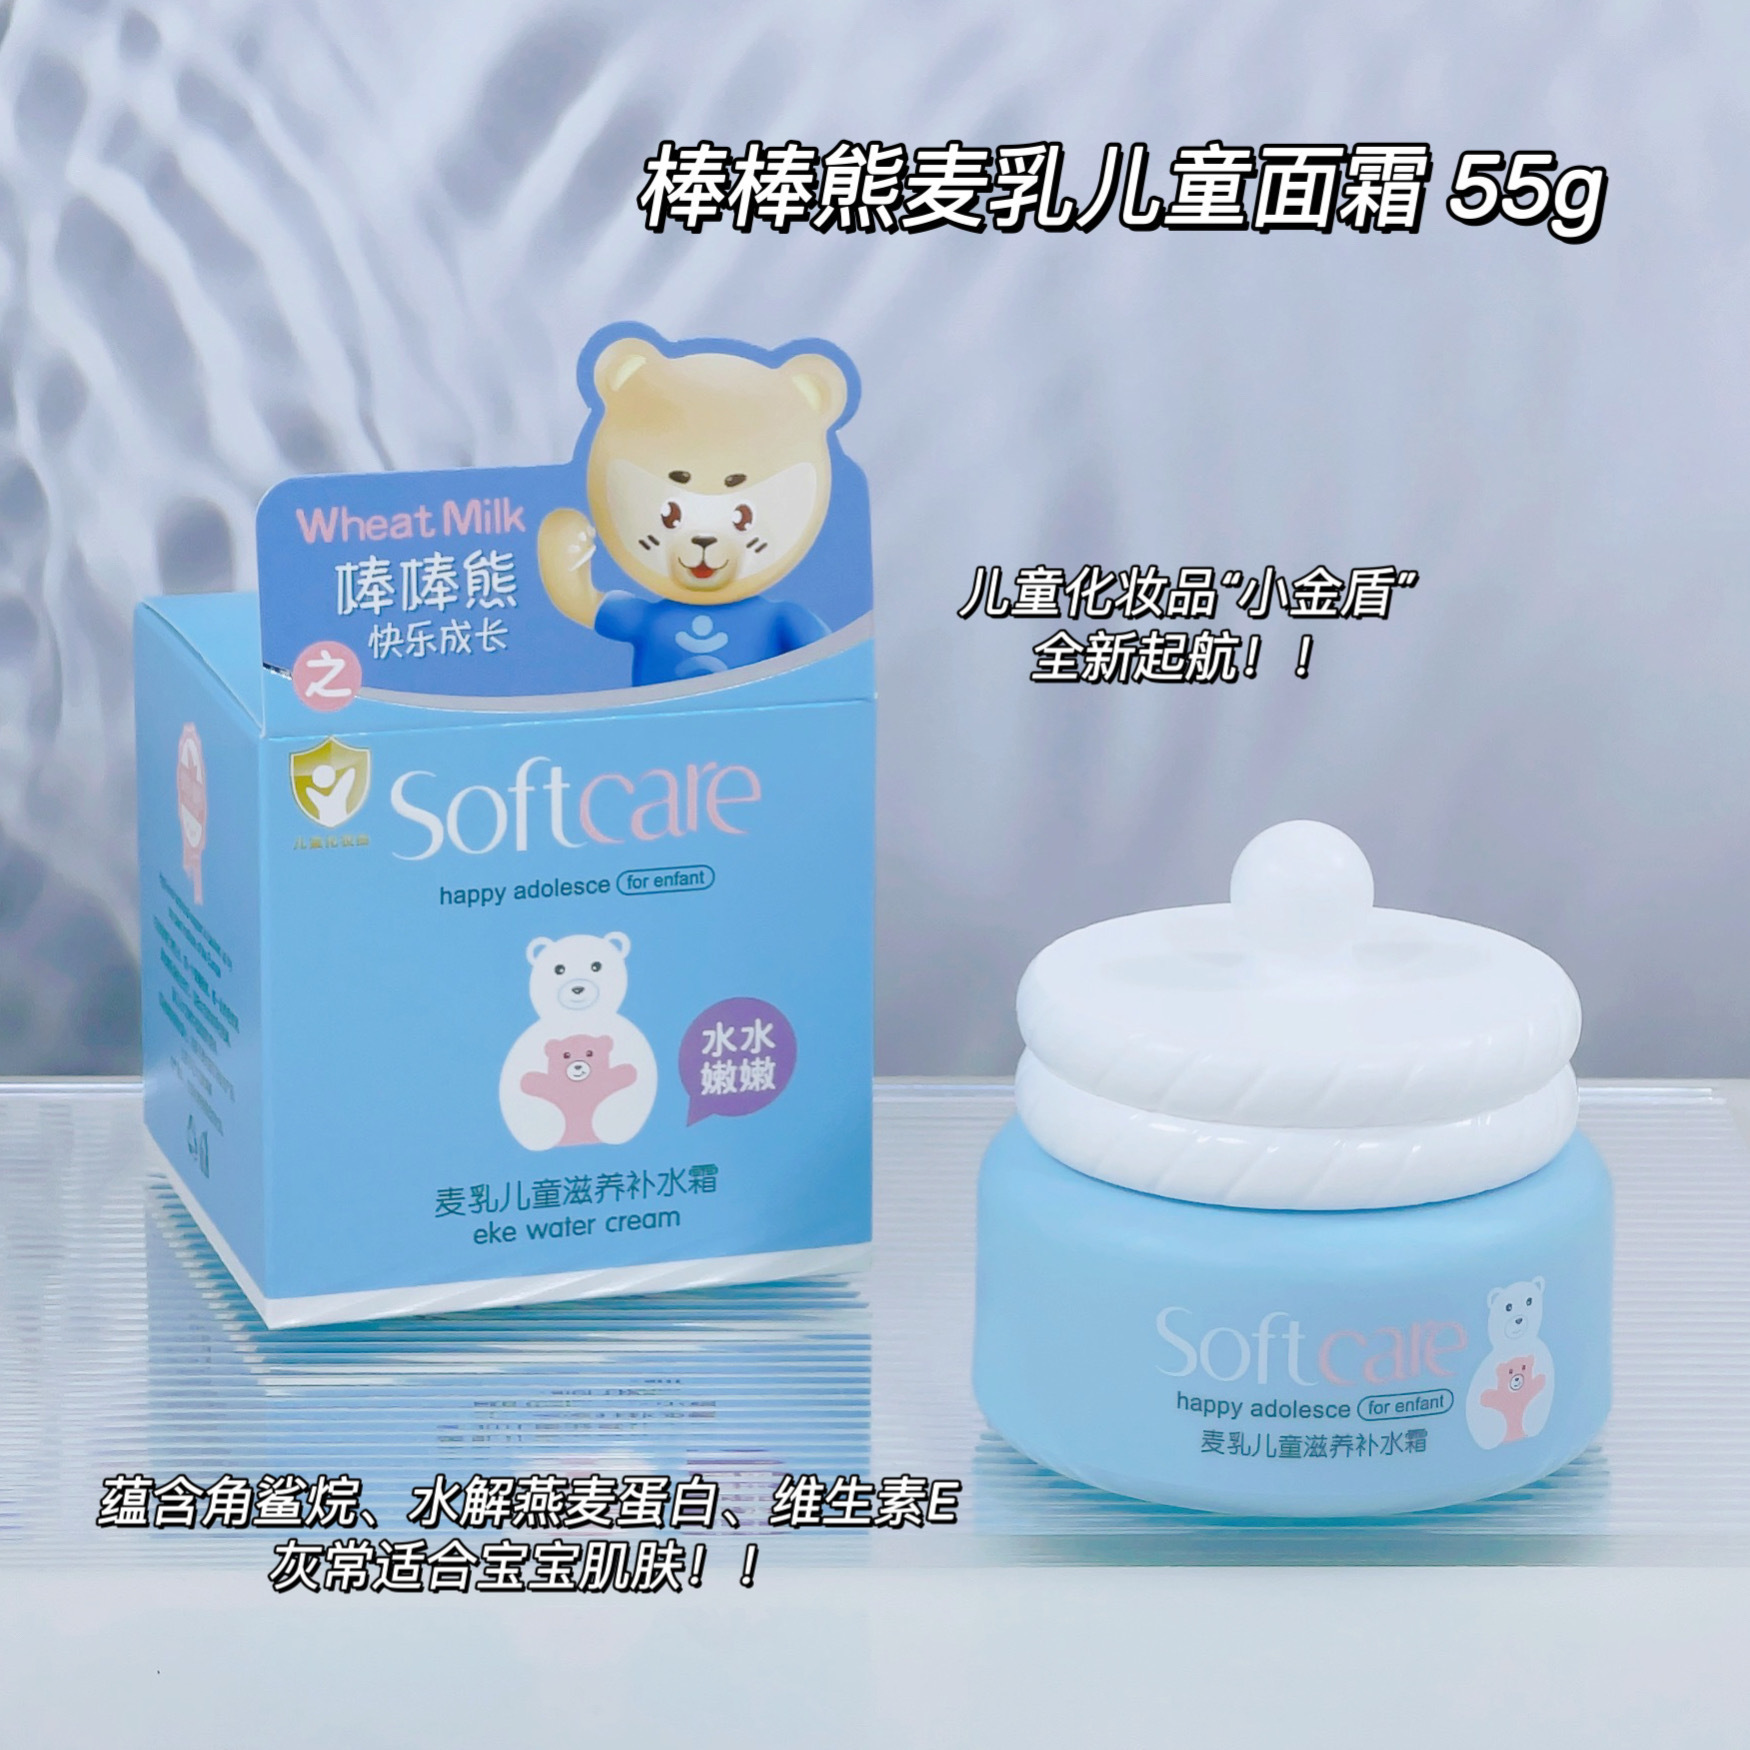 Children's Facial Cream Wheat Milk Children Nourishing Hydrating Moisturizing Cream Baby and Infant Facial Care Lotion Authentic Lotion